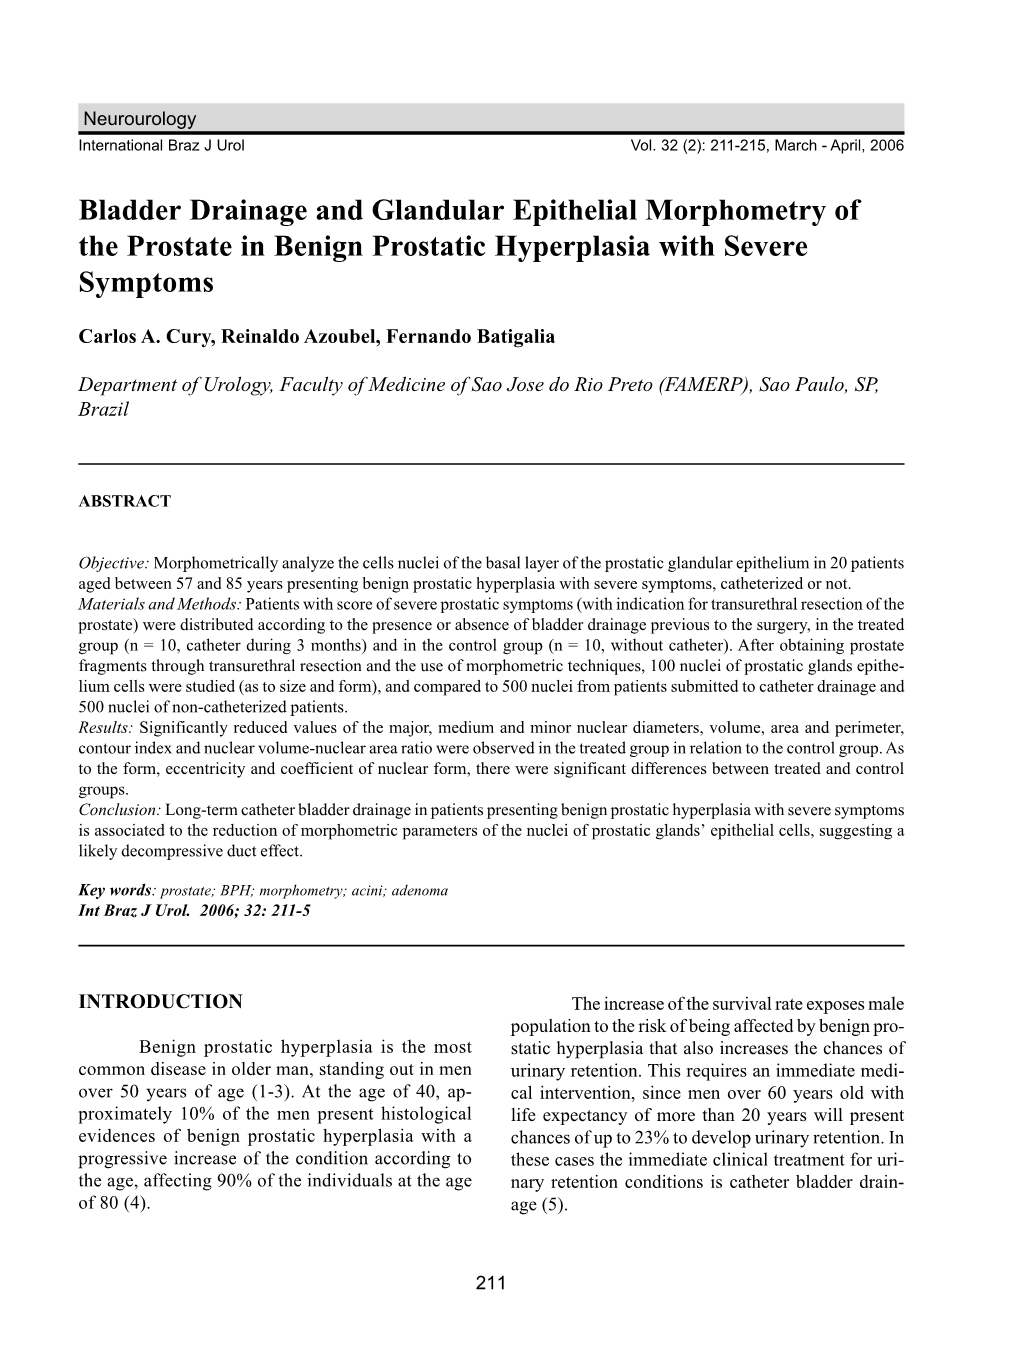 Bladder Drainage and Glandular Epithelial Morphometry of the Prostate in Benign Prostatic Hyperplasia with Severe Symptoms